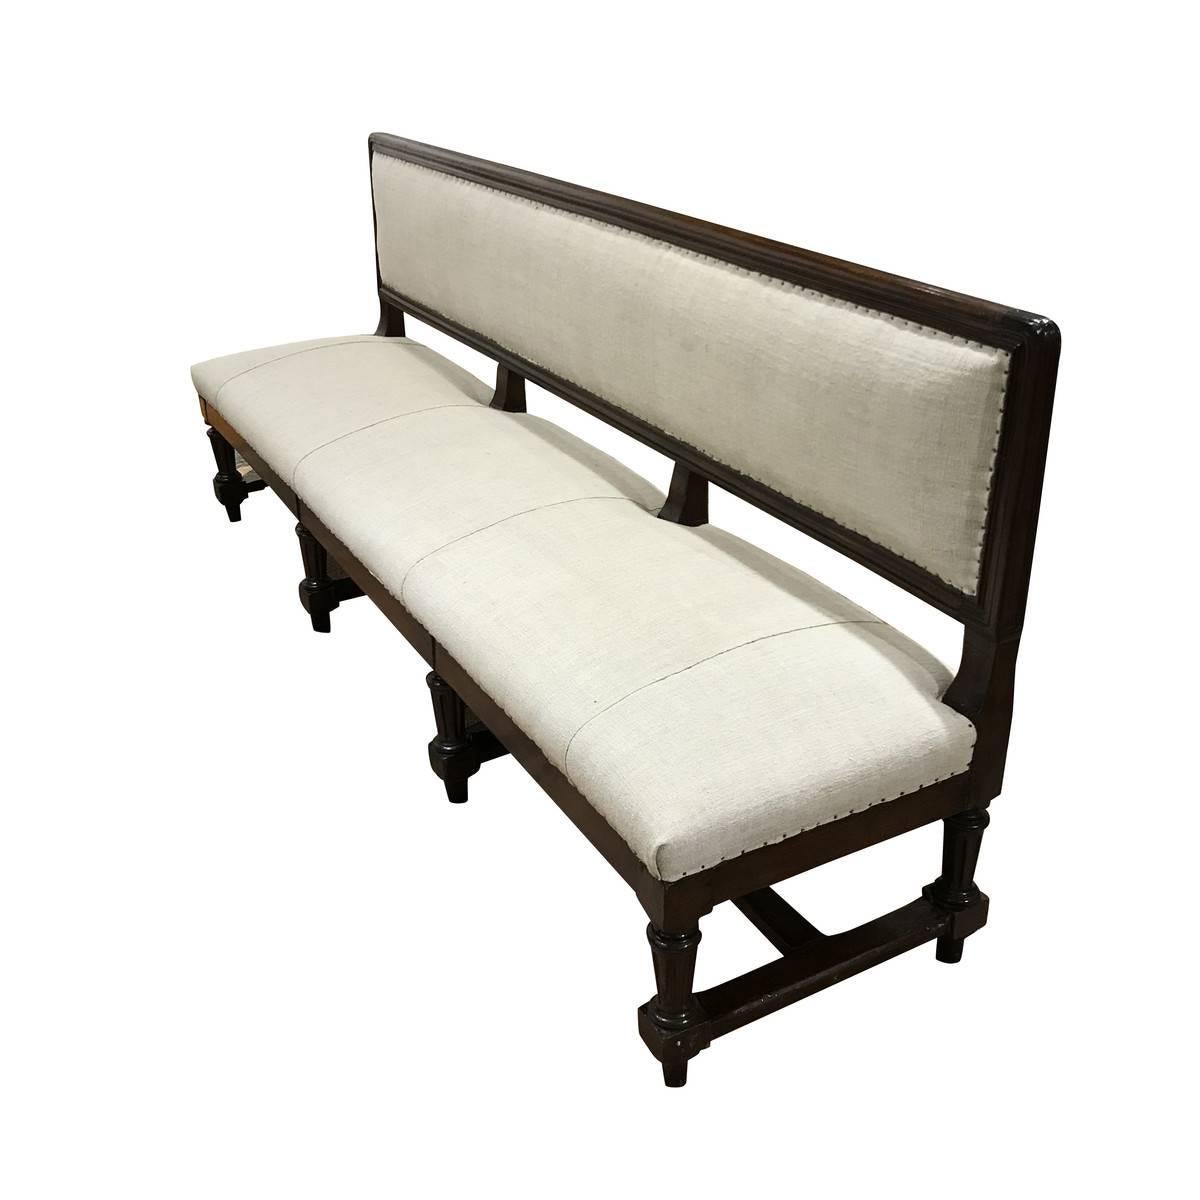 Italian long walnut bench with back, circa 1860
Newly reupholstered in vintage Belgian linen.
 